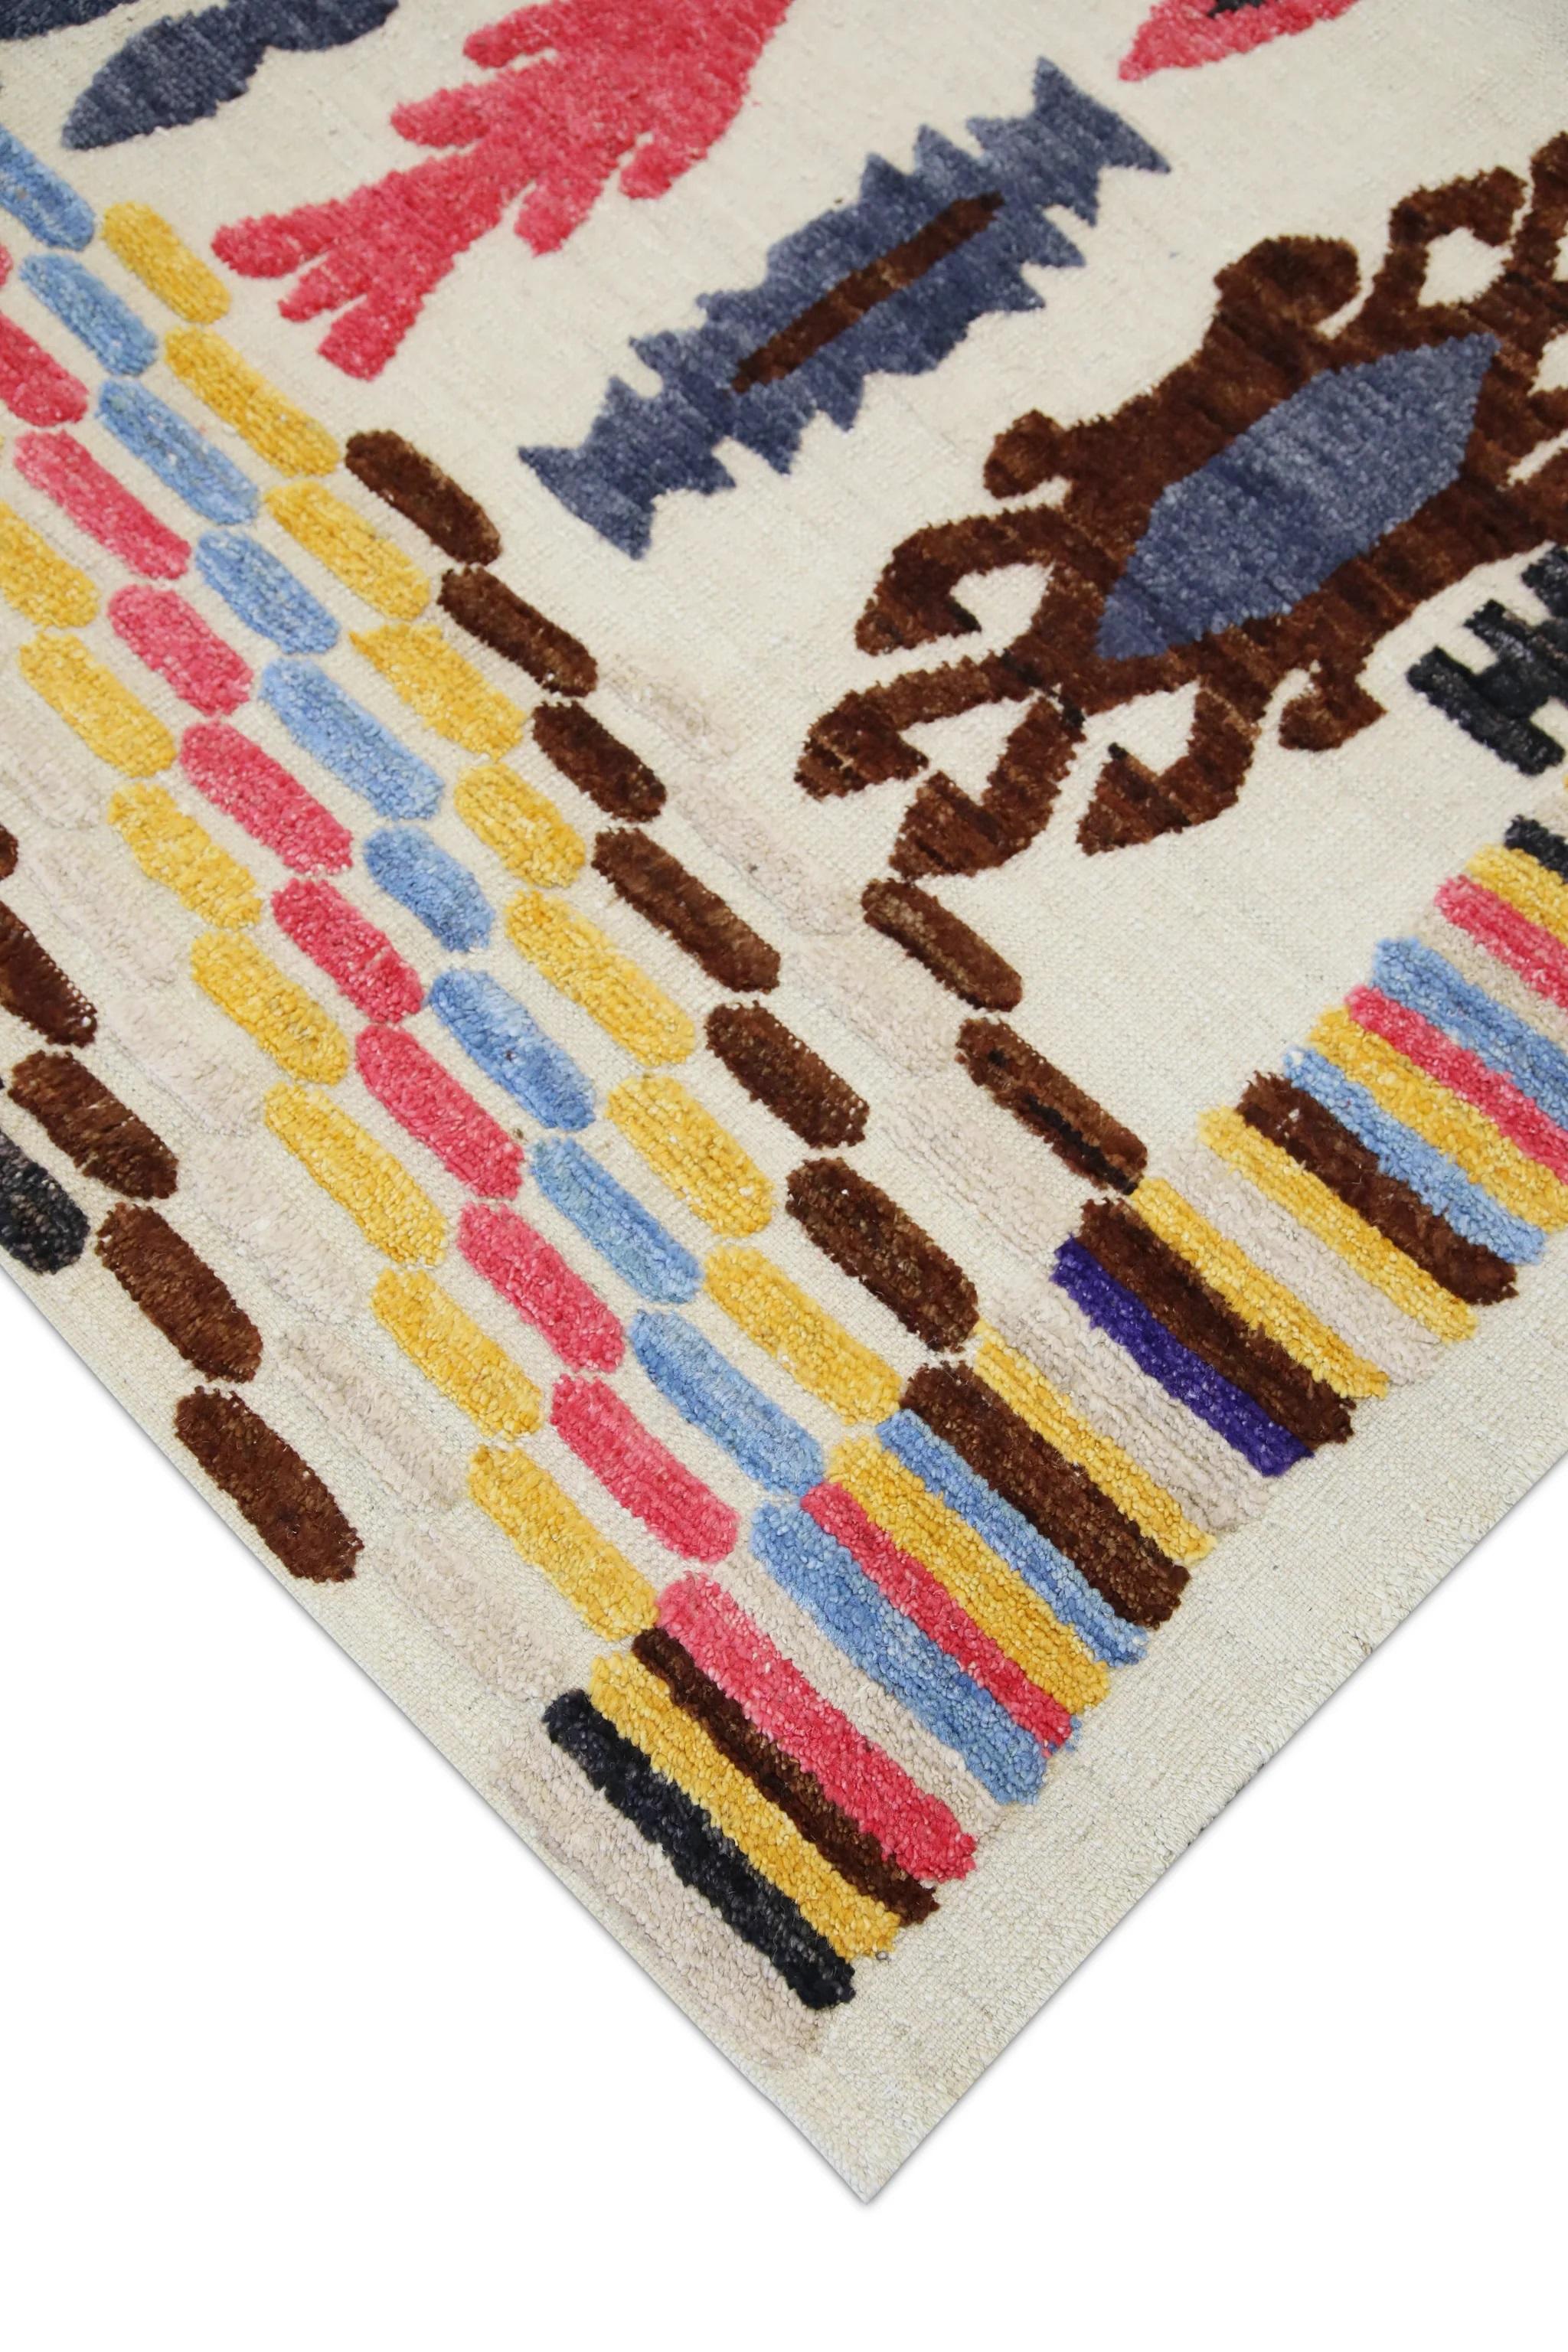 This exquisite Turkish flatweave Kilim rug is a stunning masterpiece of traditional craftsmanship. Each rug is meticulously handwoven by skilled artisans using age-old techniques that have been passed down through generations. The intricate design